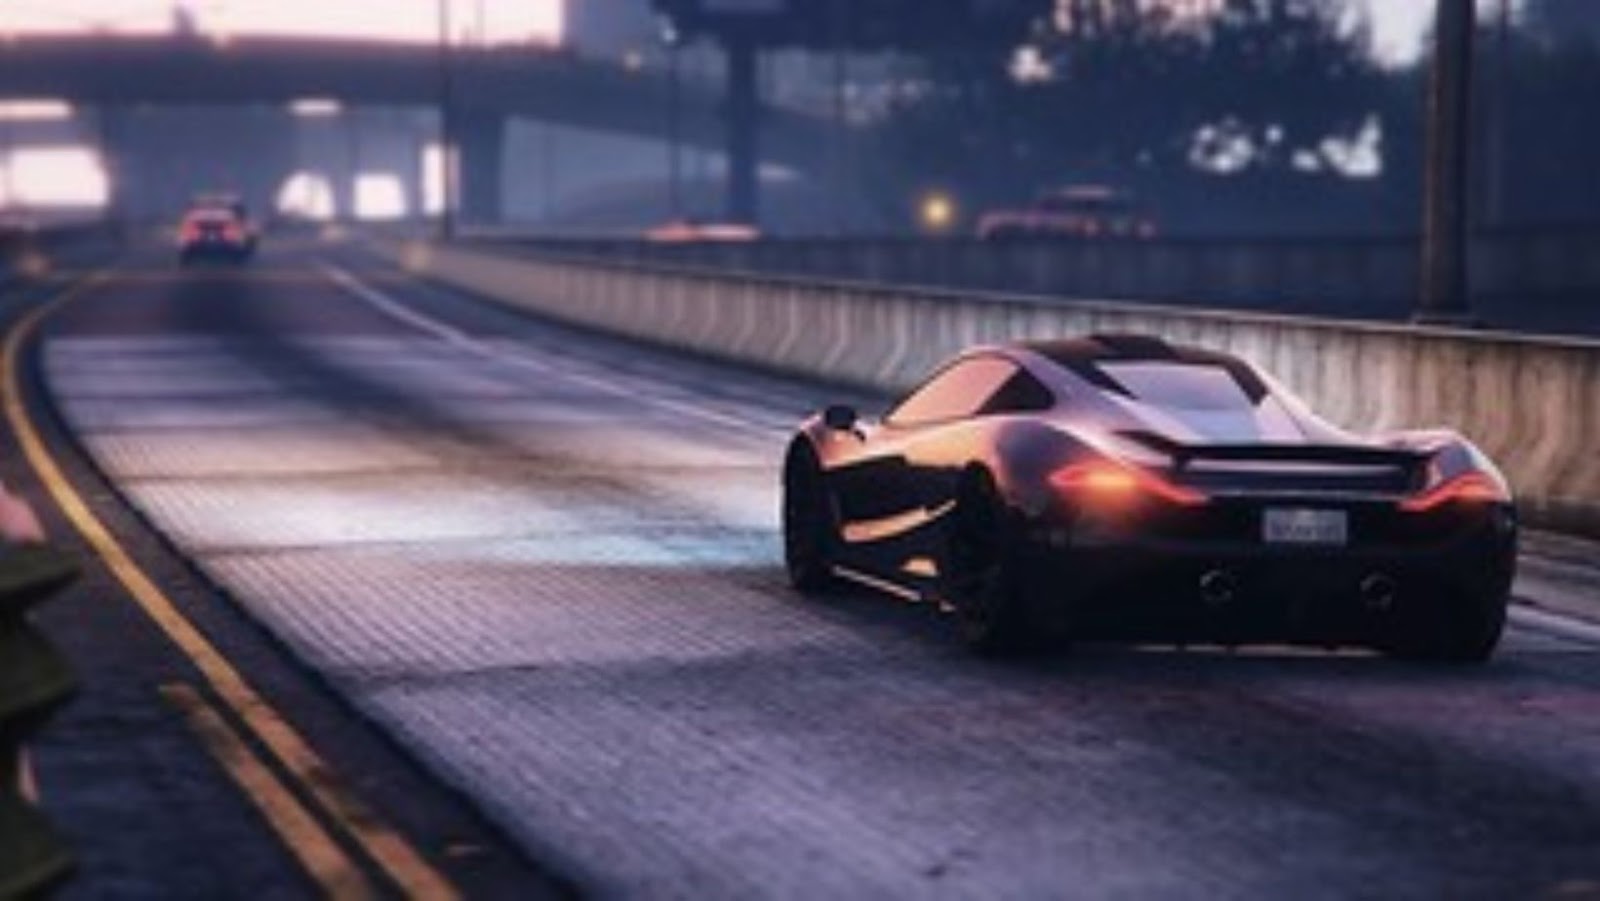 Enhance Your Grand Theft Auto Experience Even Further With A Clever Username